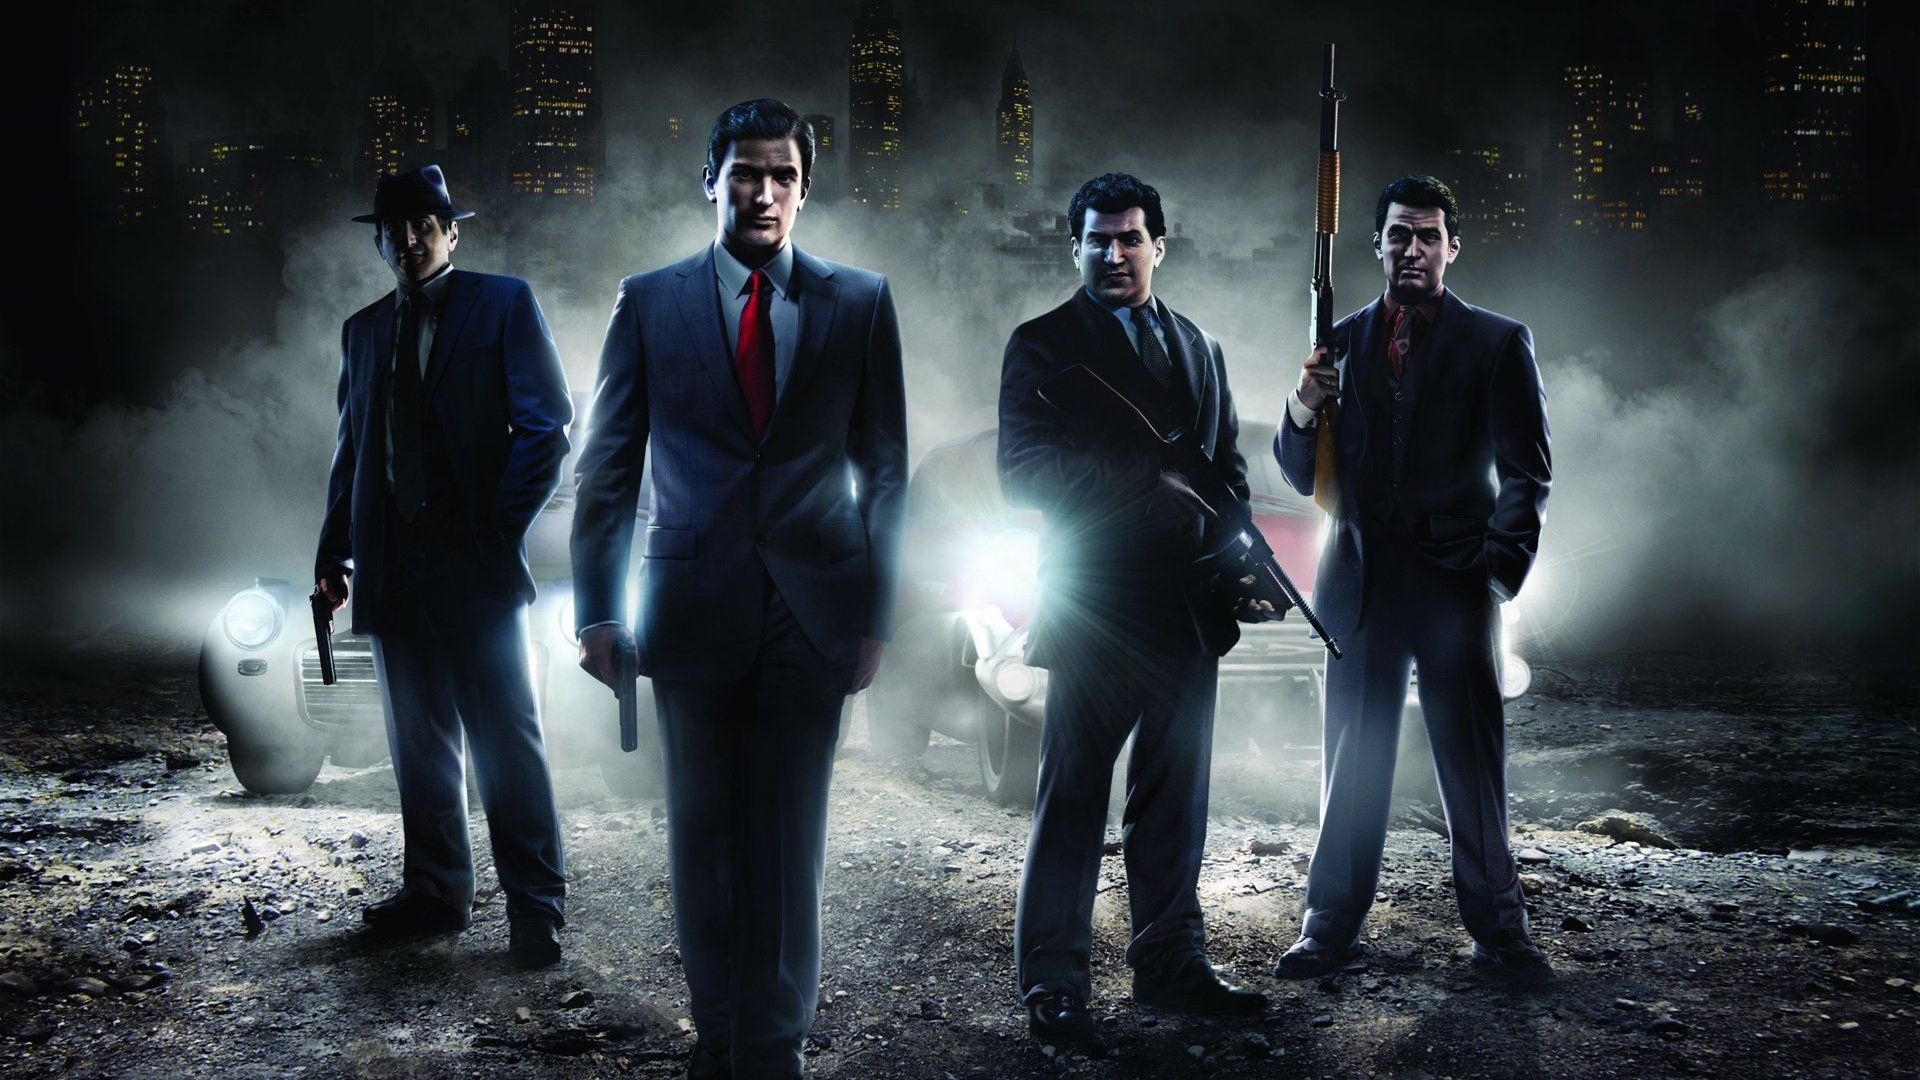 Mafia game series, Top free wallpapers, Background images, 1920x1080 Full HD Desktop